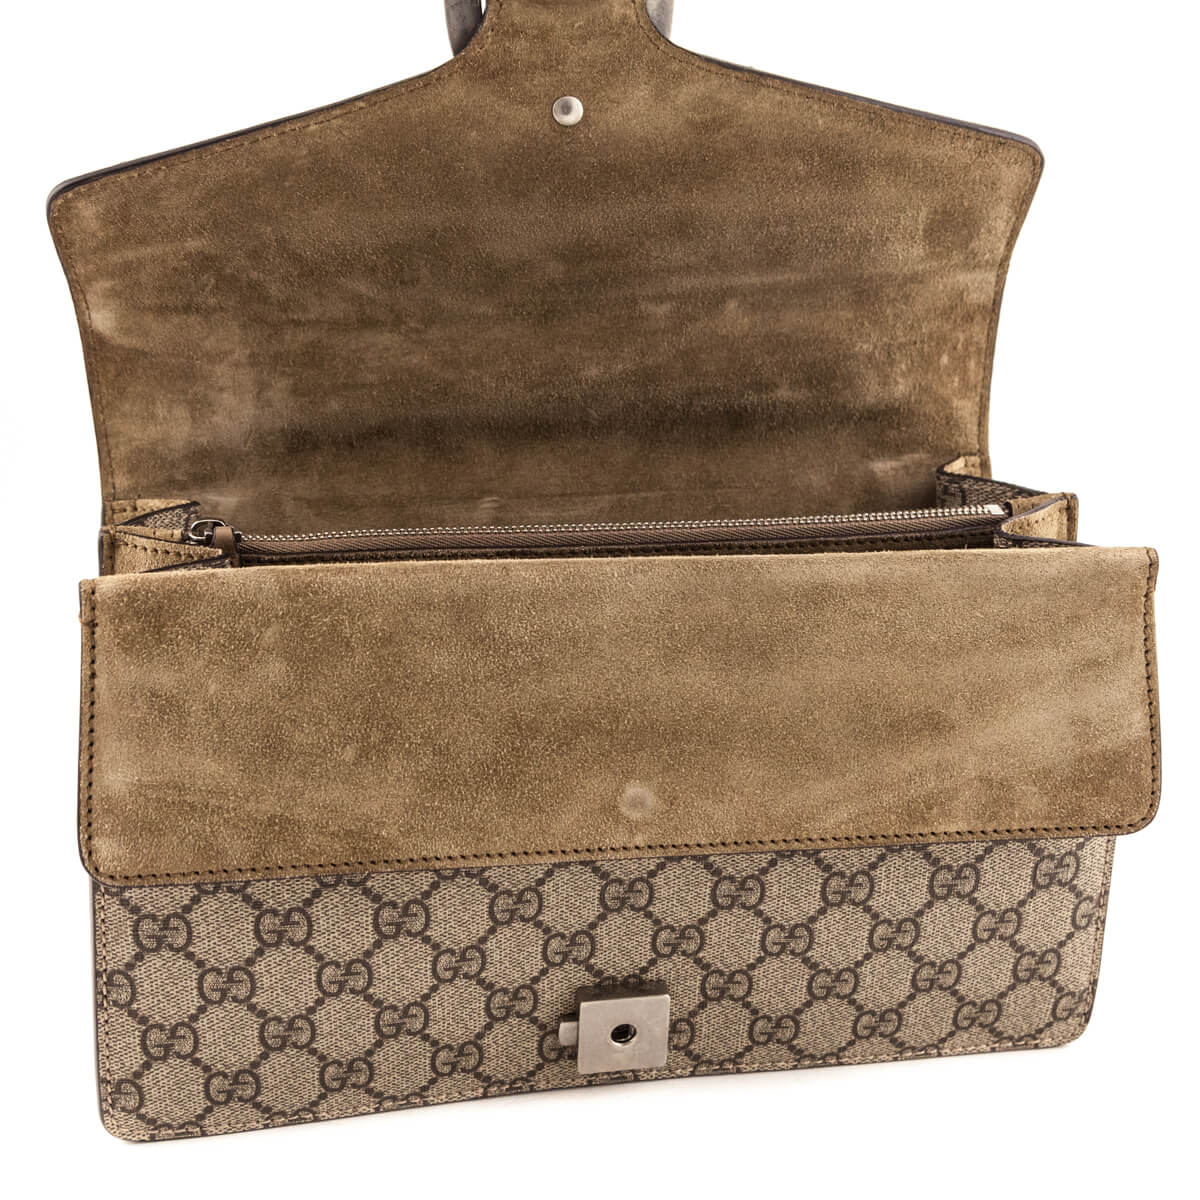 Gucci Beige GG Supreme & Taupe Suede Small Dionysus Bag - Love that Bag etc - Preowned Authentic Designer Handbags & Preloved Fashions